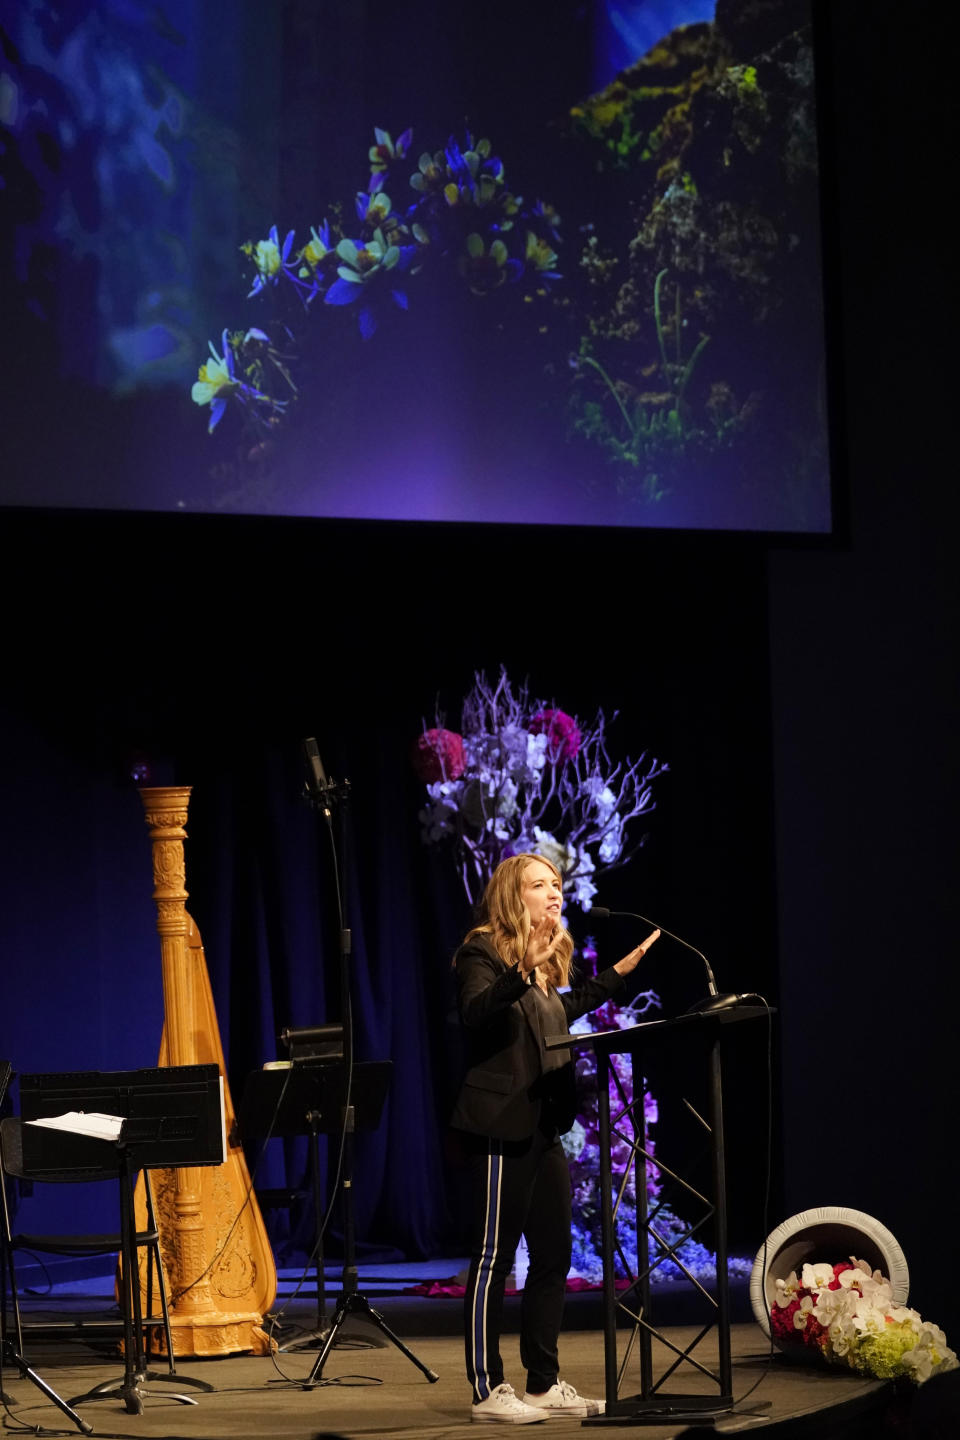 Crystal Woodman-Miller, who was a student at Columbine High School at the time of the massacre, speaks during a faith-based memorial service for the victims of the killing spree at the school nearly 20 years earlier, at a community church, Thursday, April 18, 2019, in Littleton, Colo. (Rick Wilking/Pool Photo via AP)